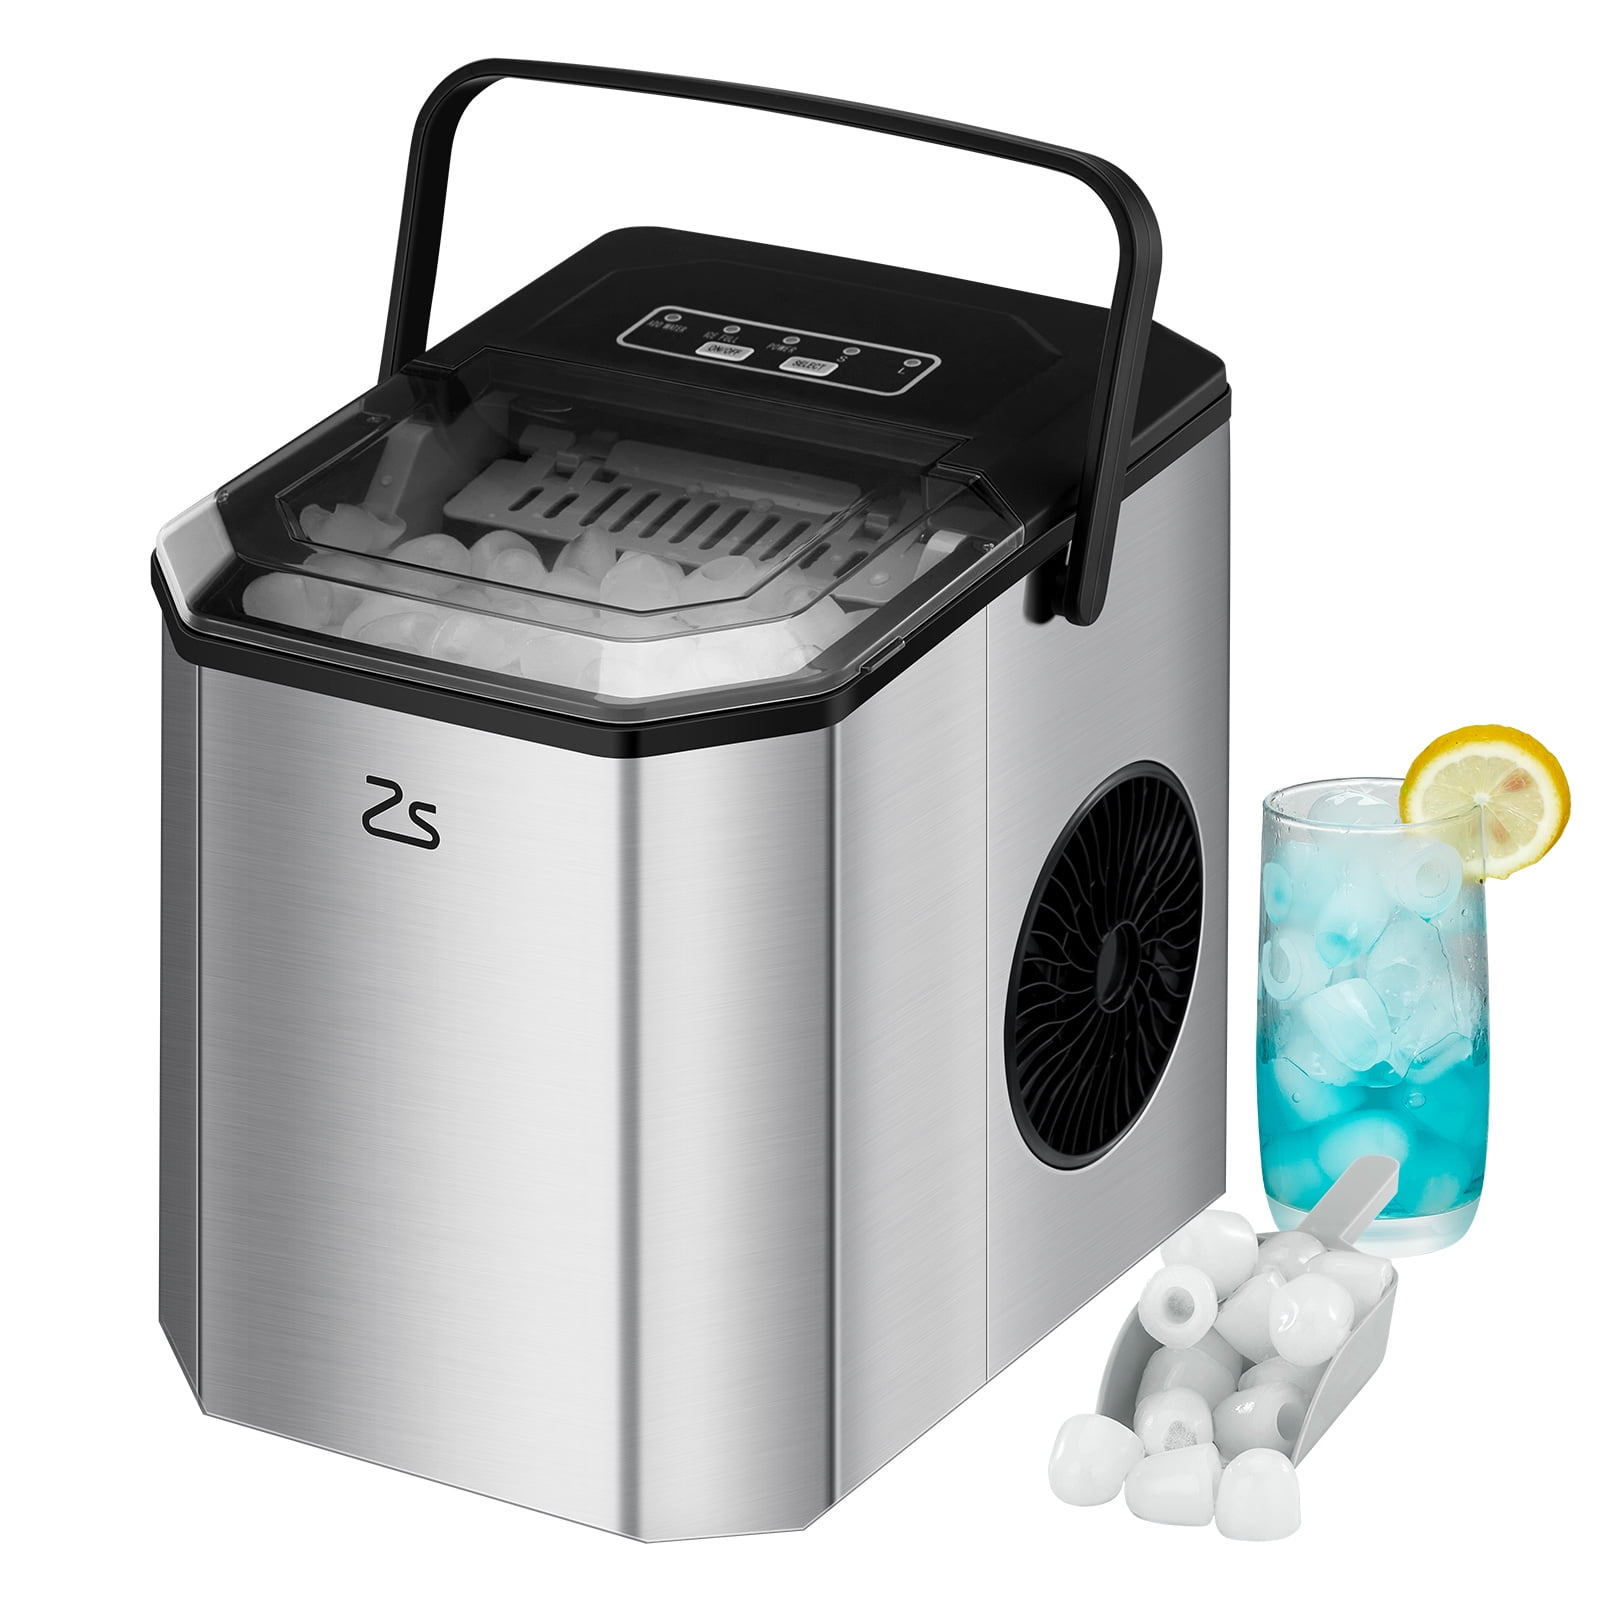 hOmeLabs Countertop Nugget Ice Maker - Stainless Steel with Touch Screen -  Portable and Compact - Chewable Nugget Ice Machine - Produces Up to 44lb of